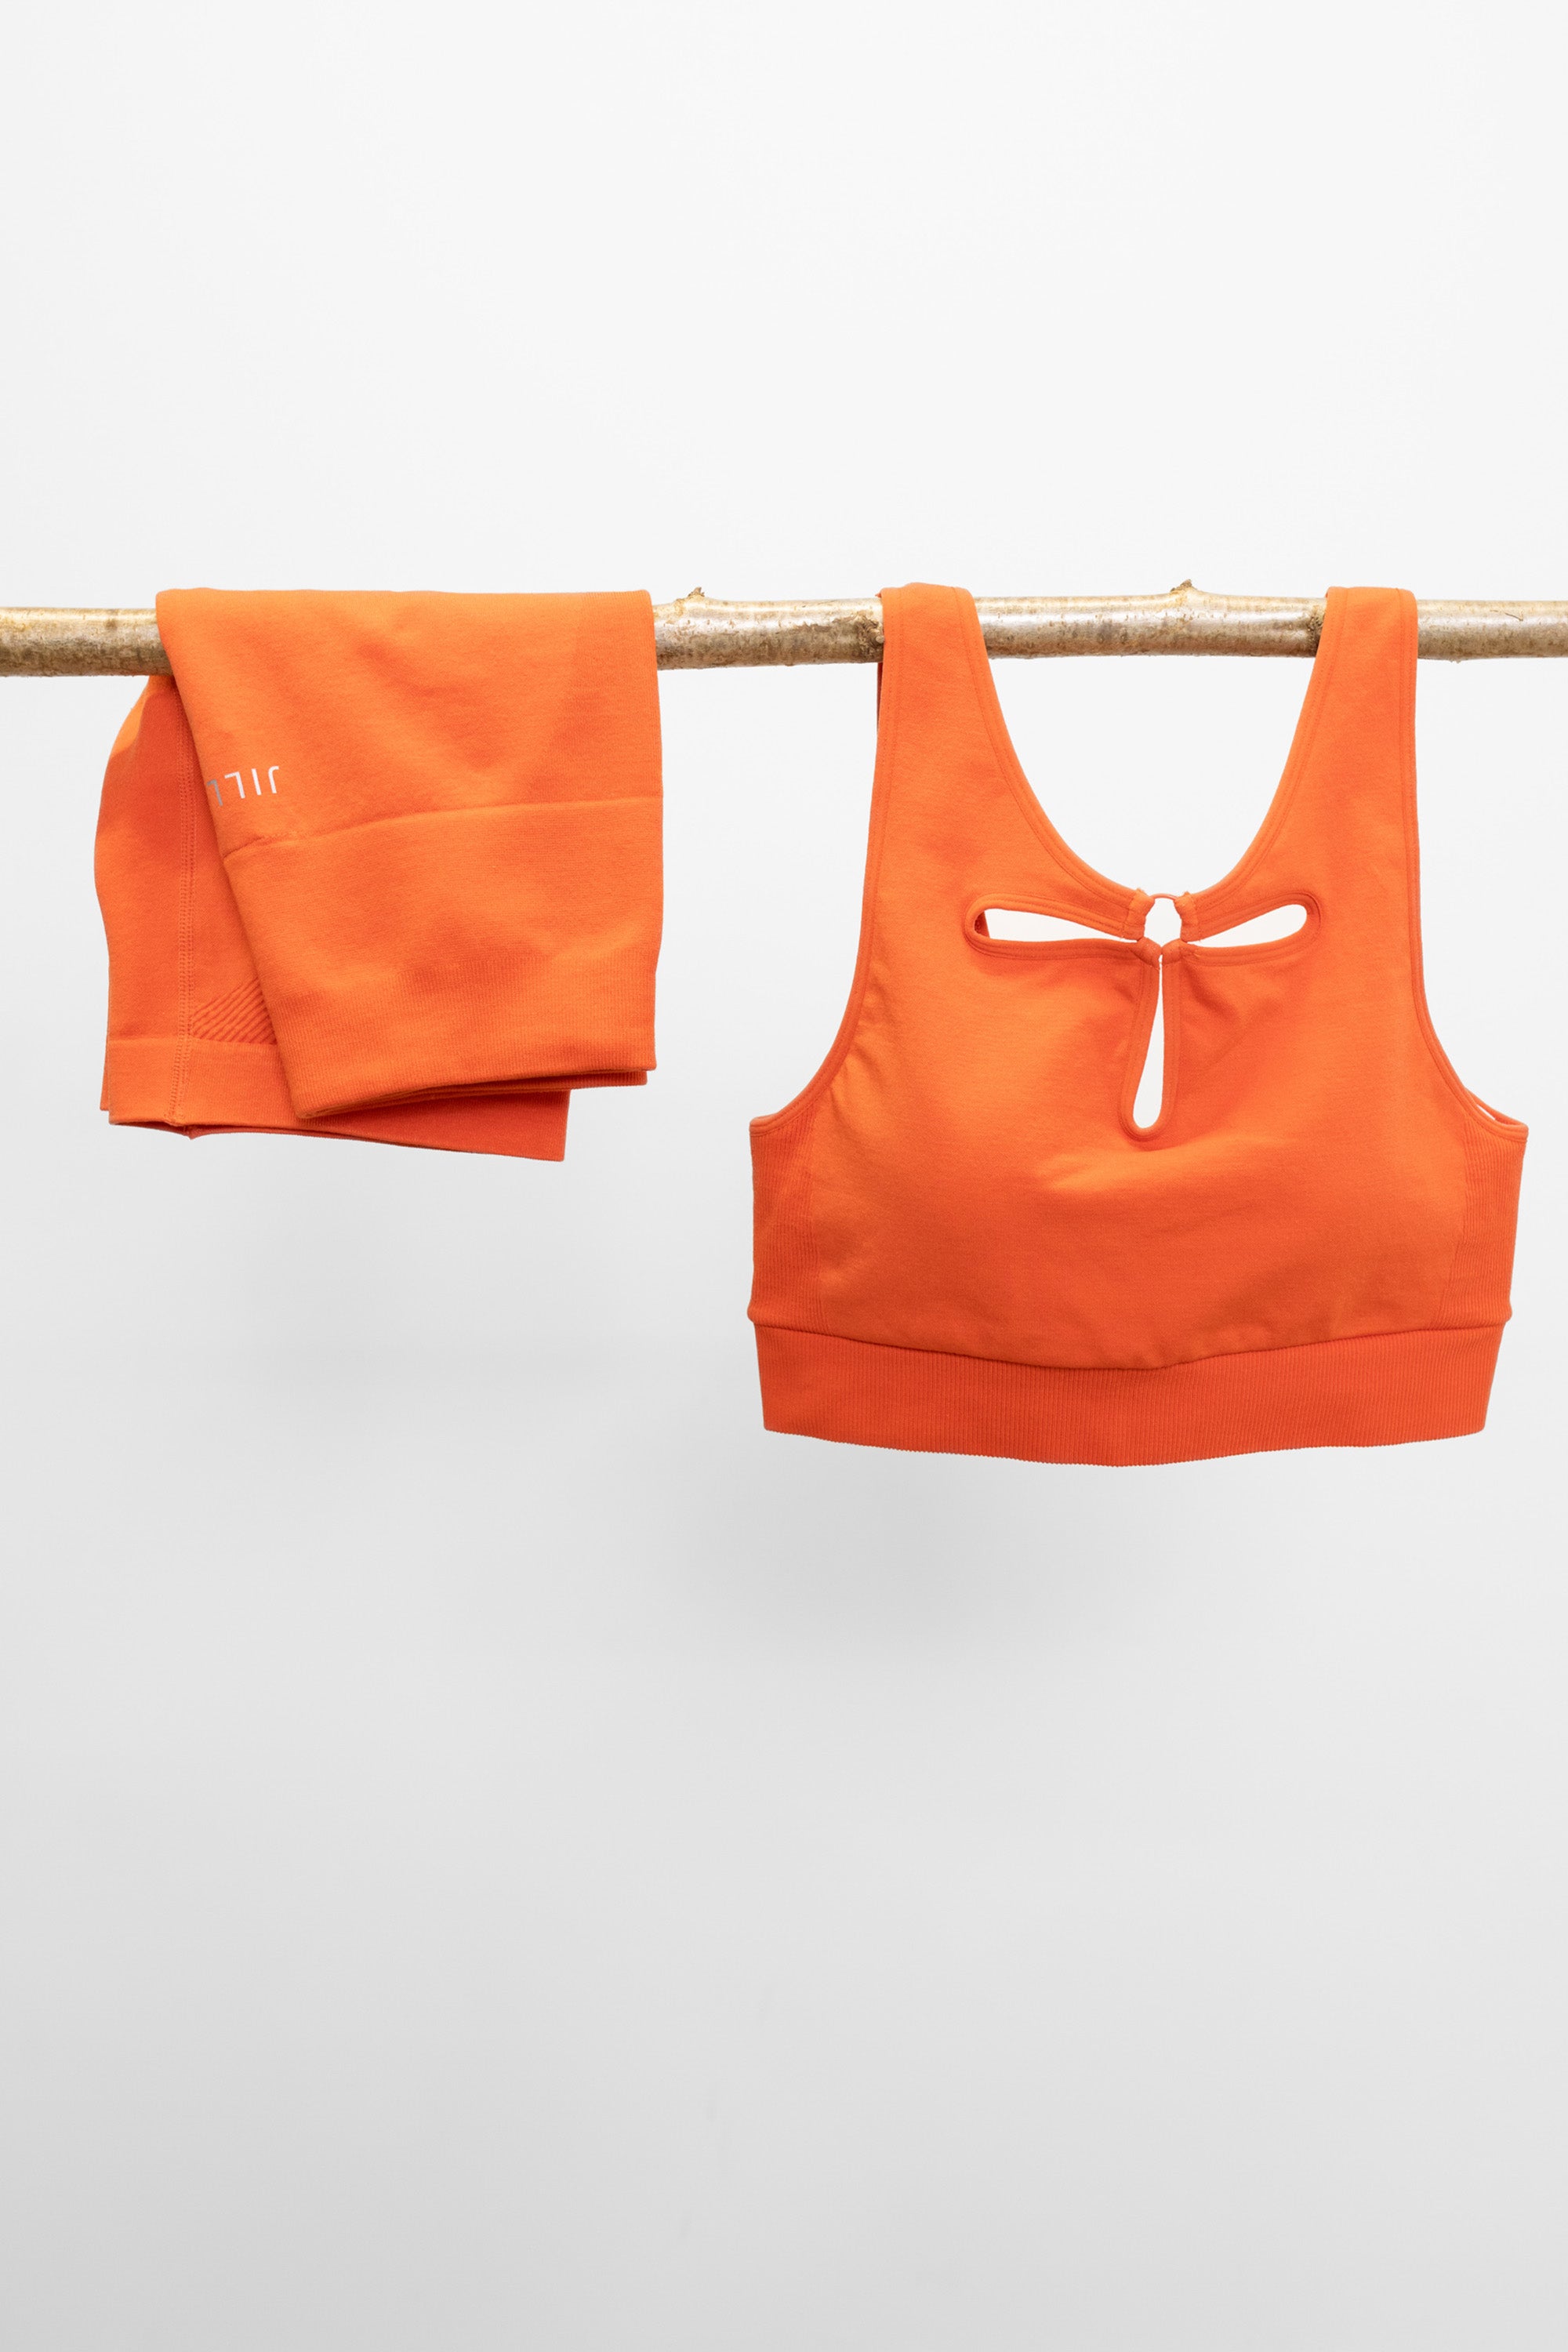 Orange supporting modal sports bra with open back and flower petal front details with orange ribbed sports shorts for pilates, yoga, gym, cycling o exercise by sustainable activewear brand Jilla Active